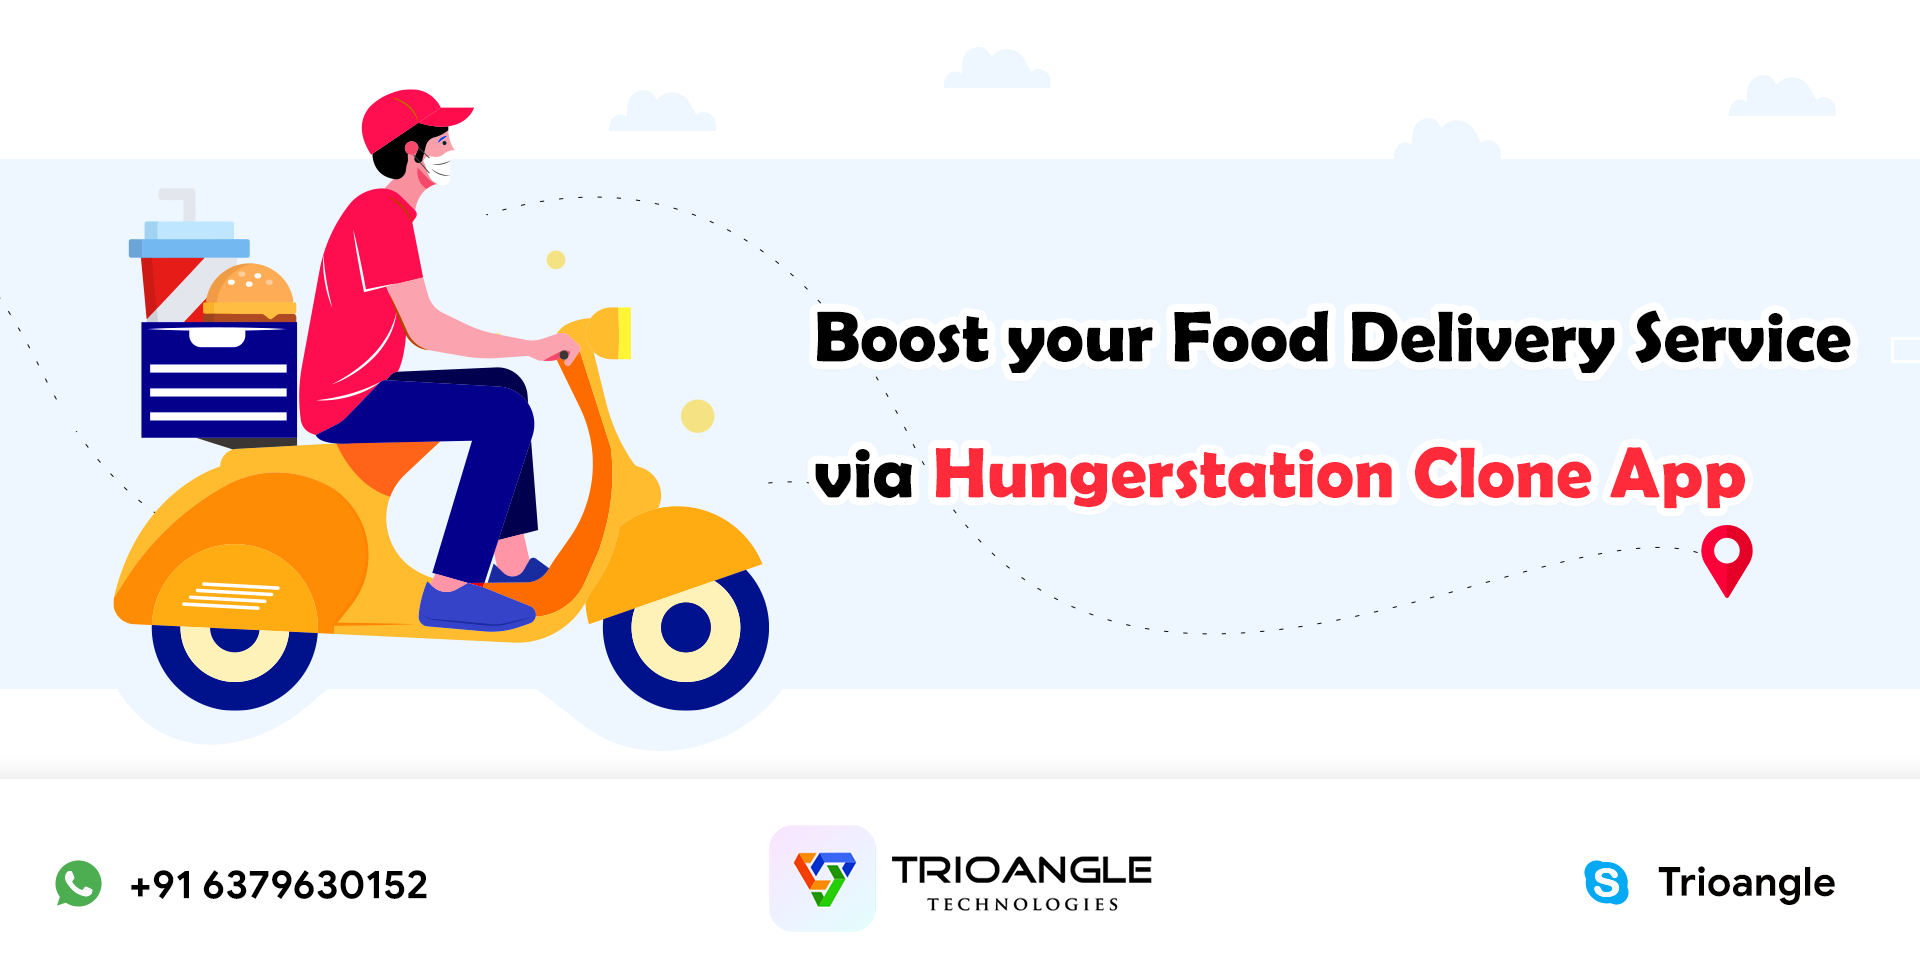 Boost your Delivery Service via Hungerstation Clone App